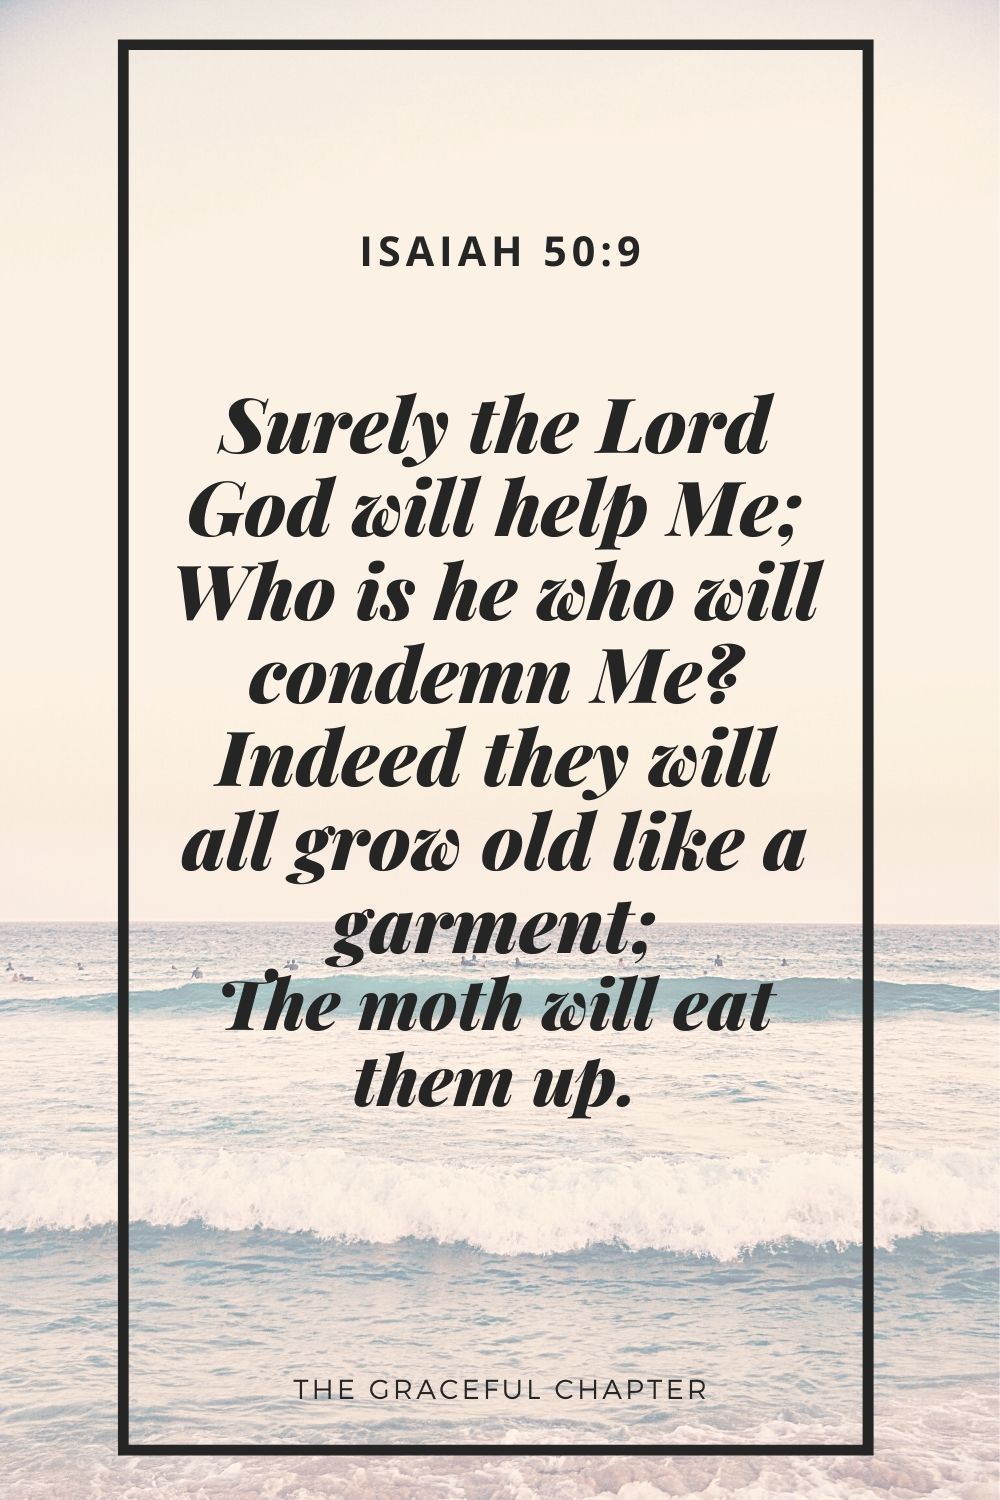 Surely the Lord God will help Me; Who is he who will condemn Me? Indeed they will all grow old like a garment; The moth will eat them up. Isaiah 50:9